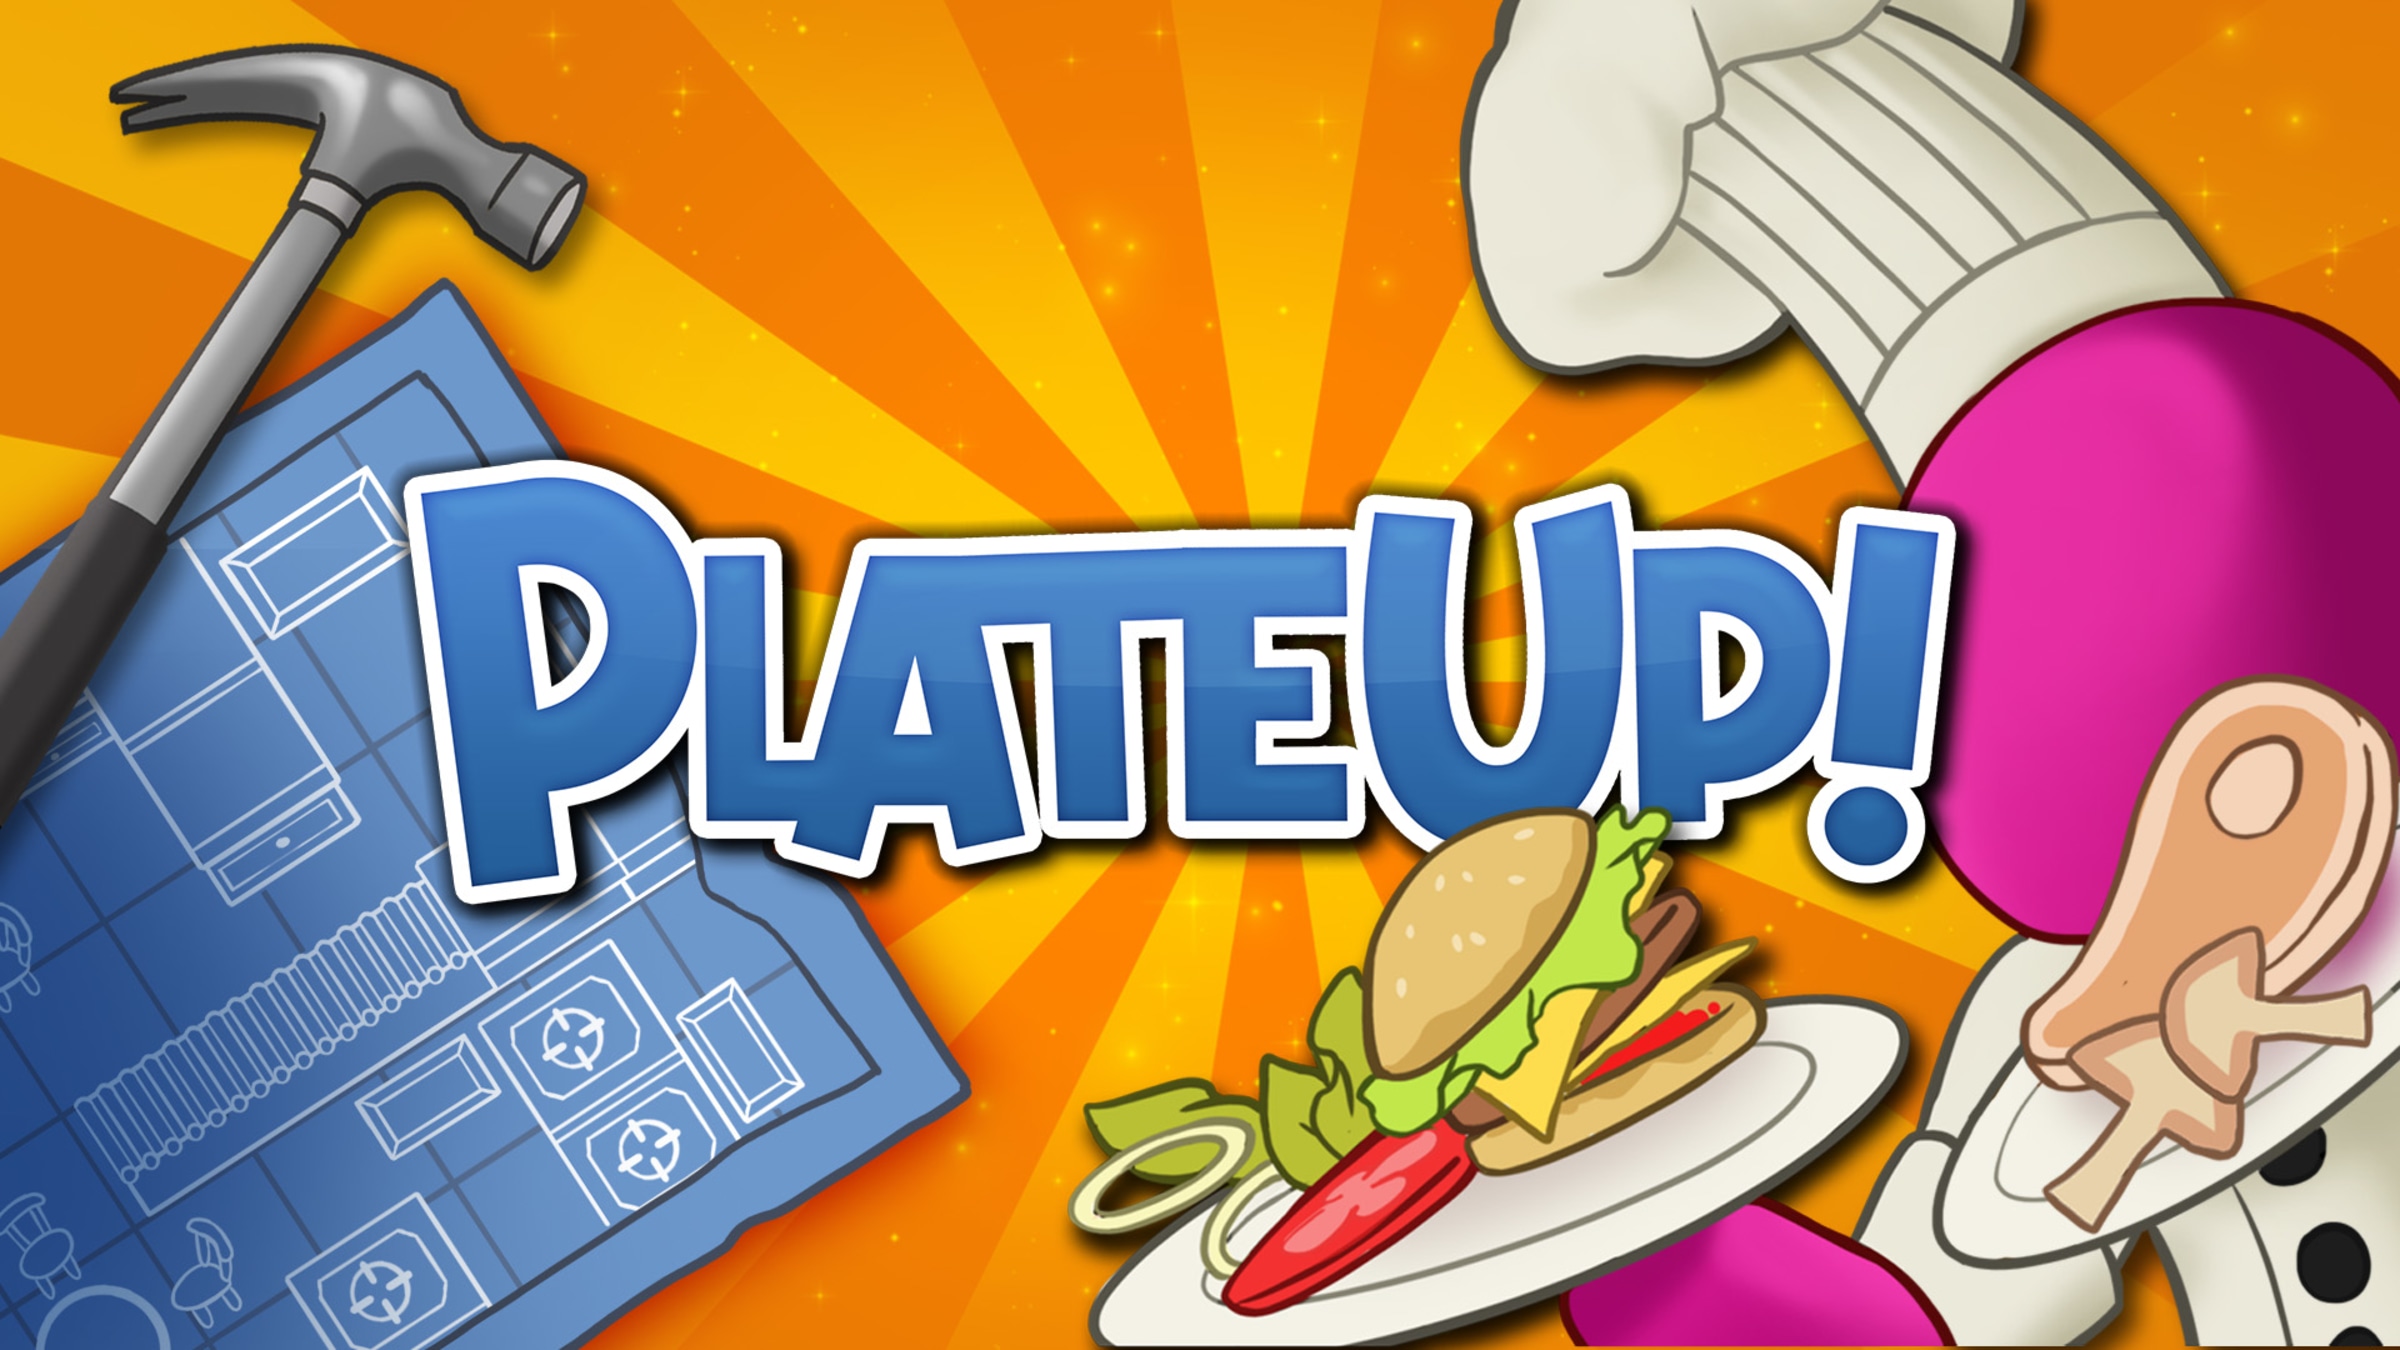 PlateUp Apk Mobile Android Version Full Game Setup Free Download